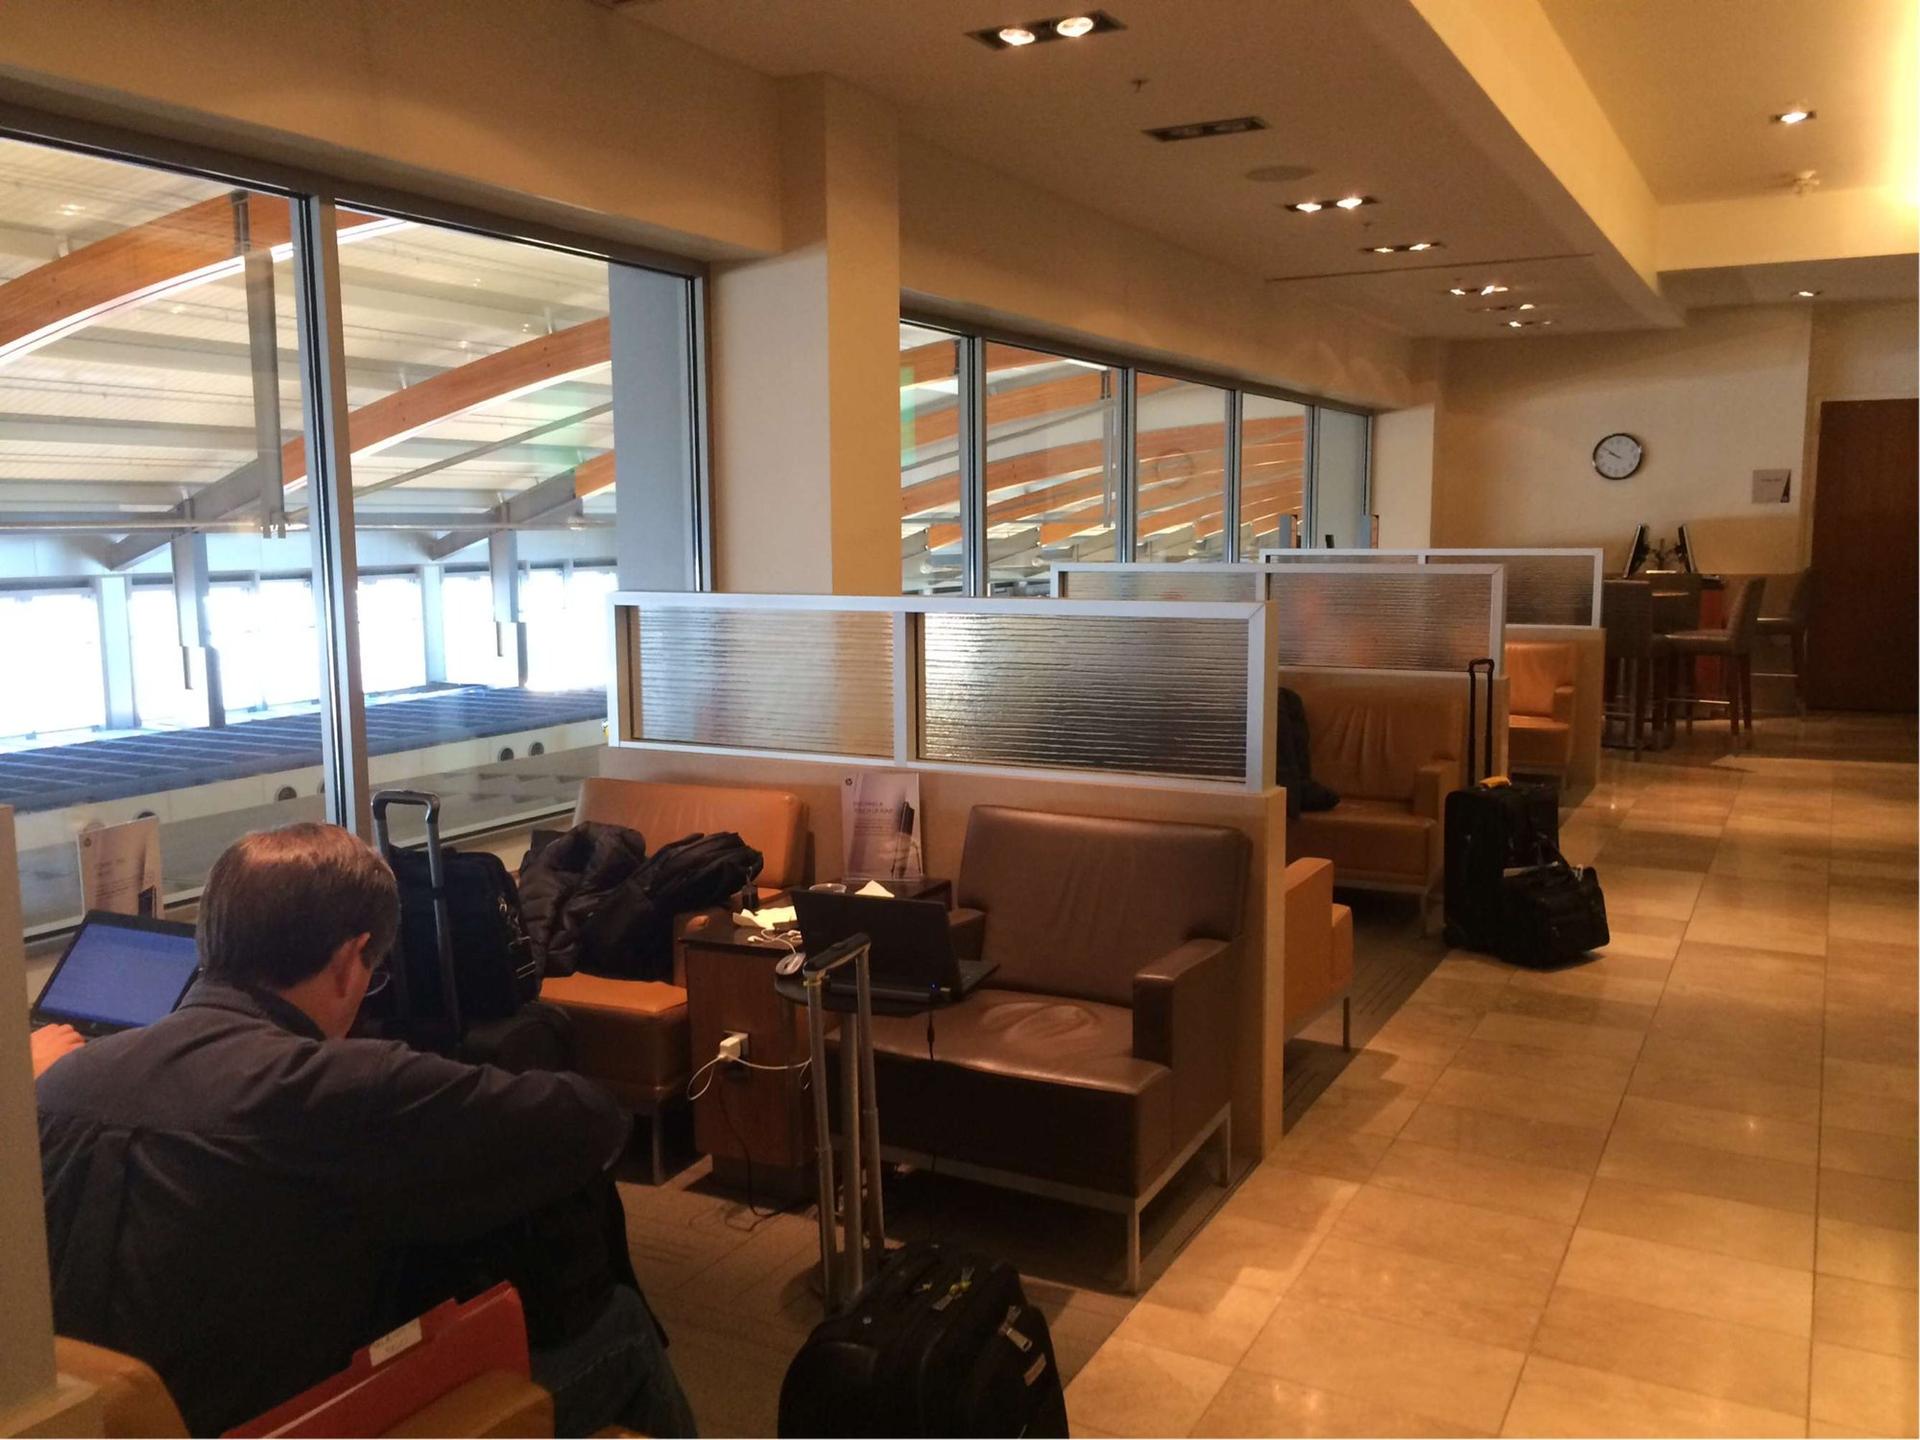 American Airlines Admirals Club image 16 of 31